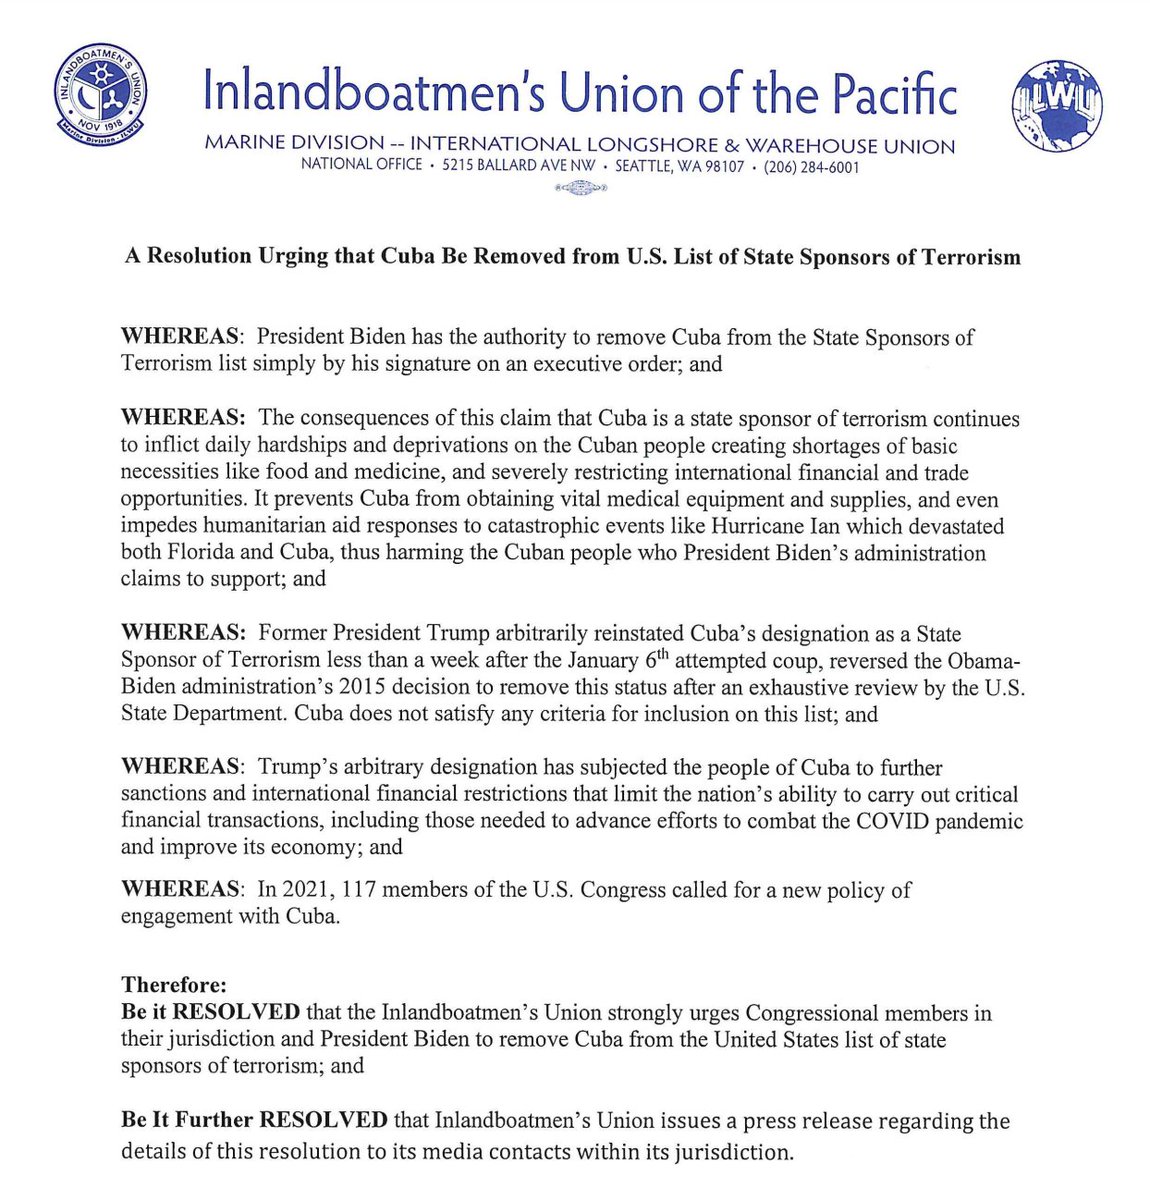 BREAKING 🚨 The IBU National Executive Council, the largest inland union representing mariners on the West Coast, passed a resolution 'strongly [urging] Congressional members in their jurisdiction & Biden to remove Cuba from the US list of state sponsors of terrorism' #OffTheList